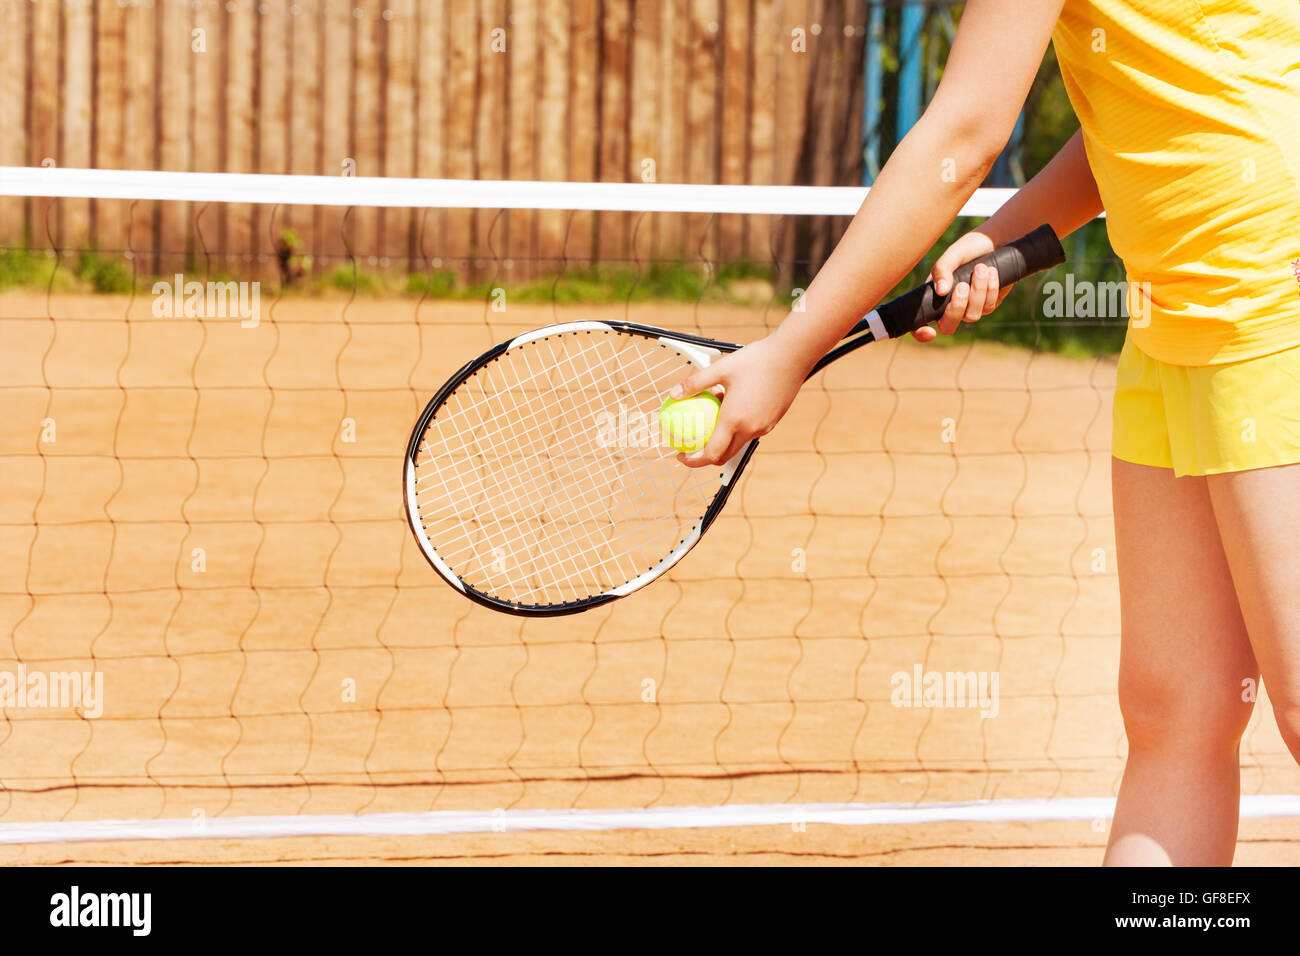 Tennis player with ball and racket on a clay court Stock Photo